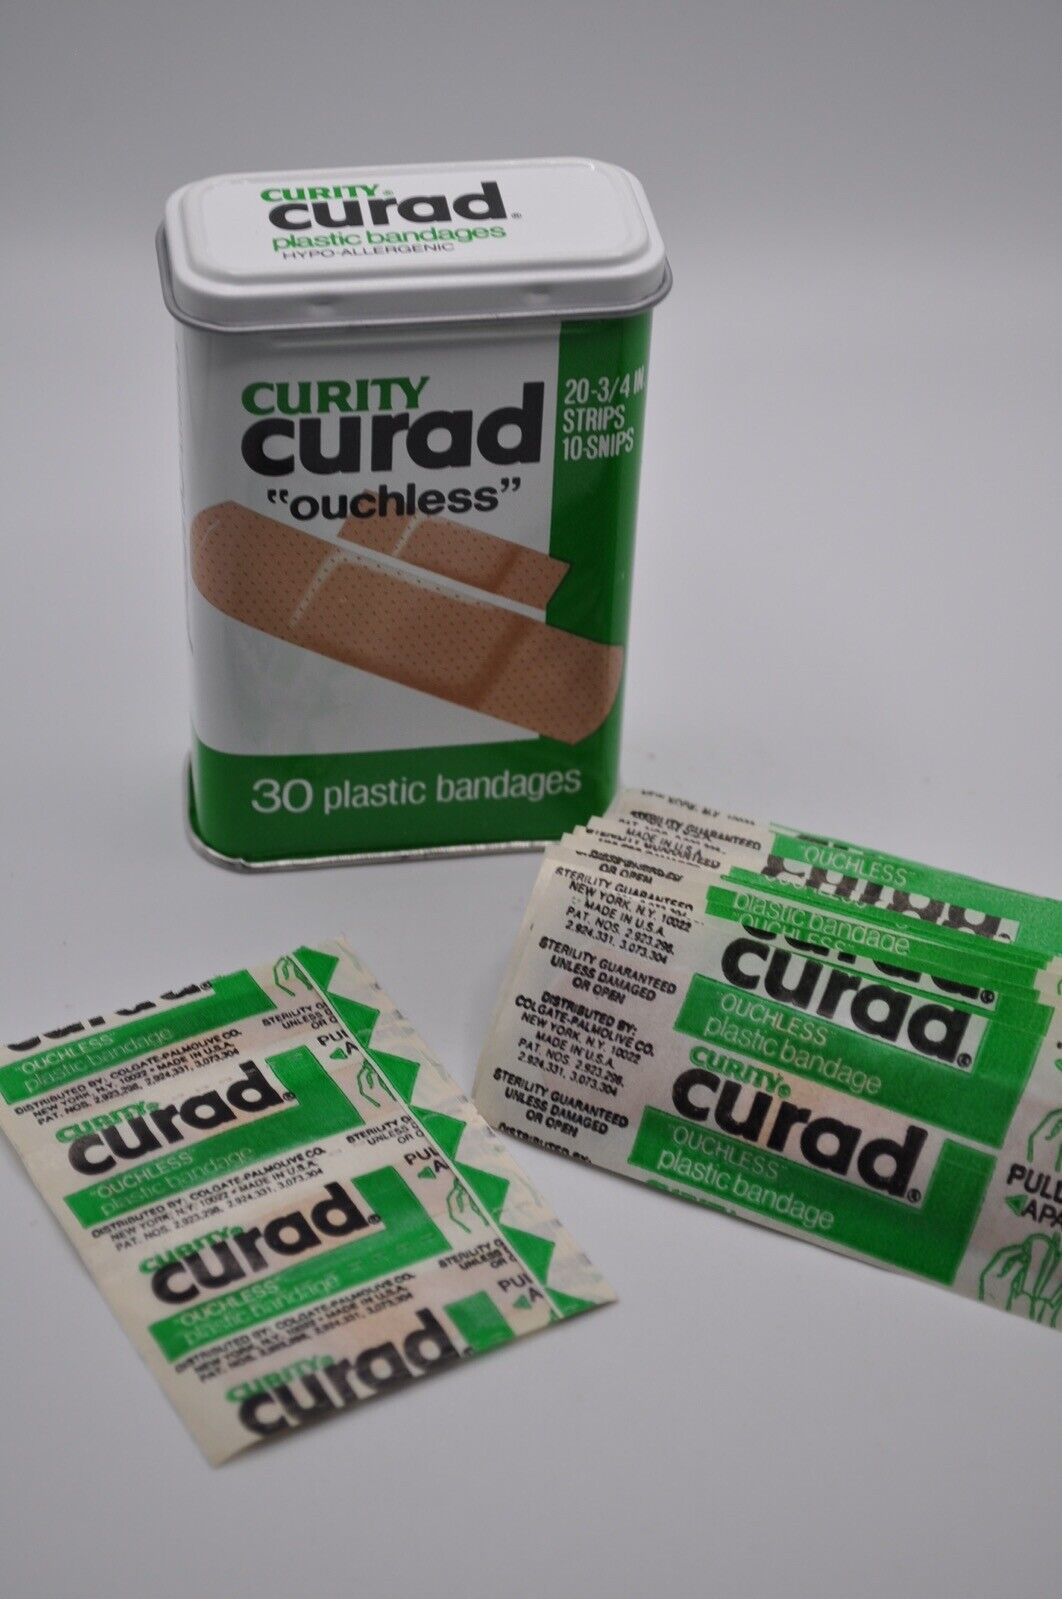 Vintage Curad Curity Box Metal Box with Plastic Bandages